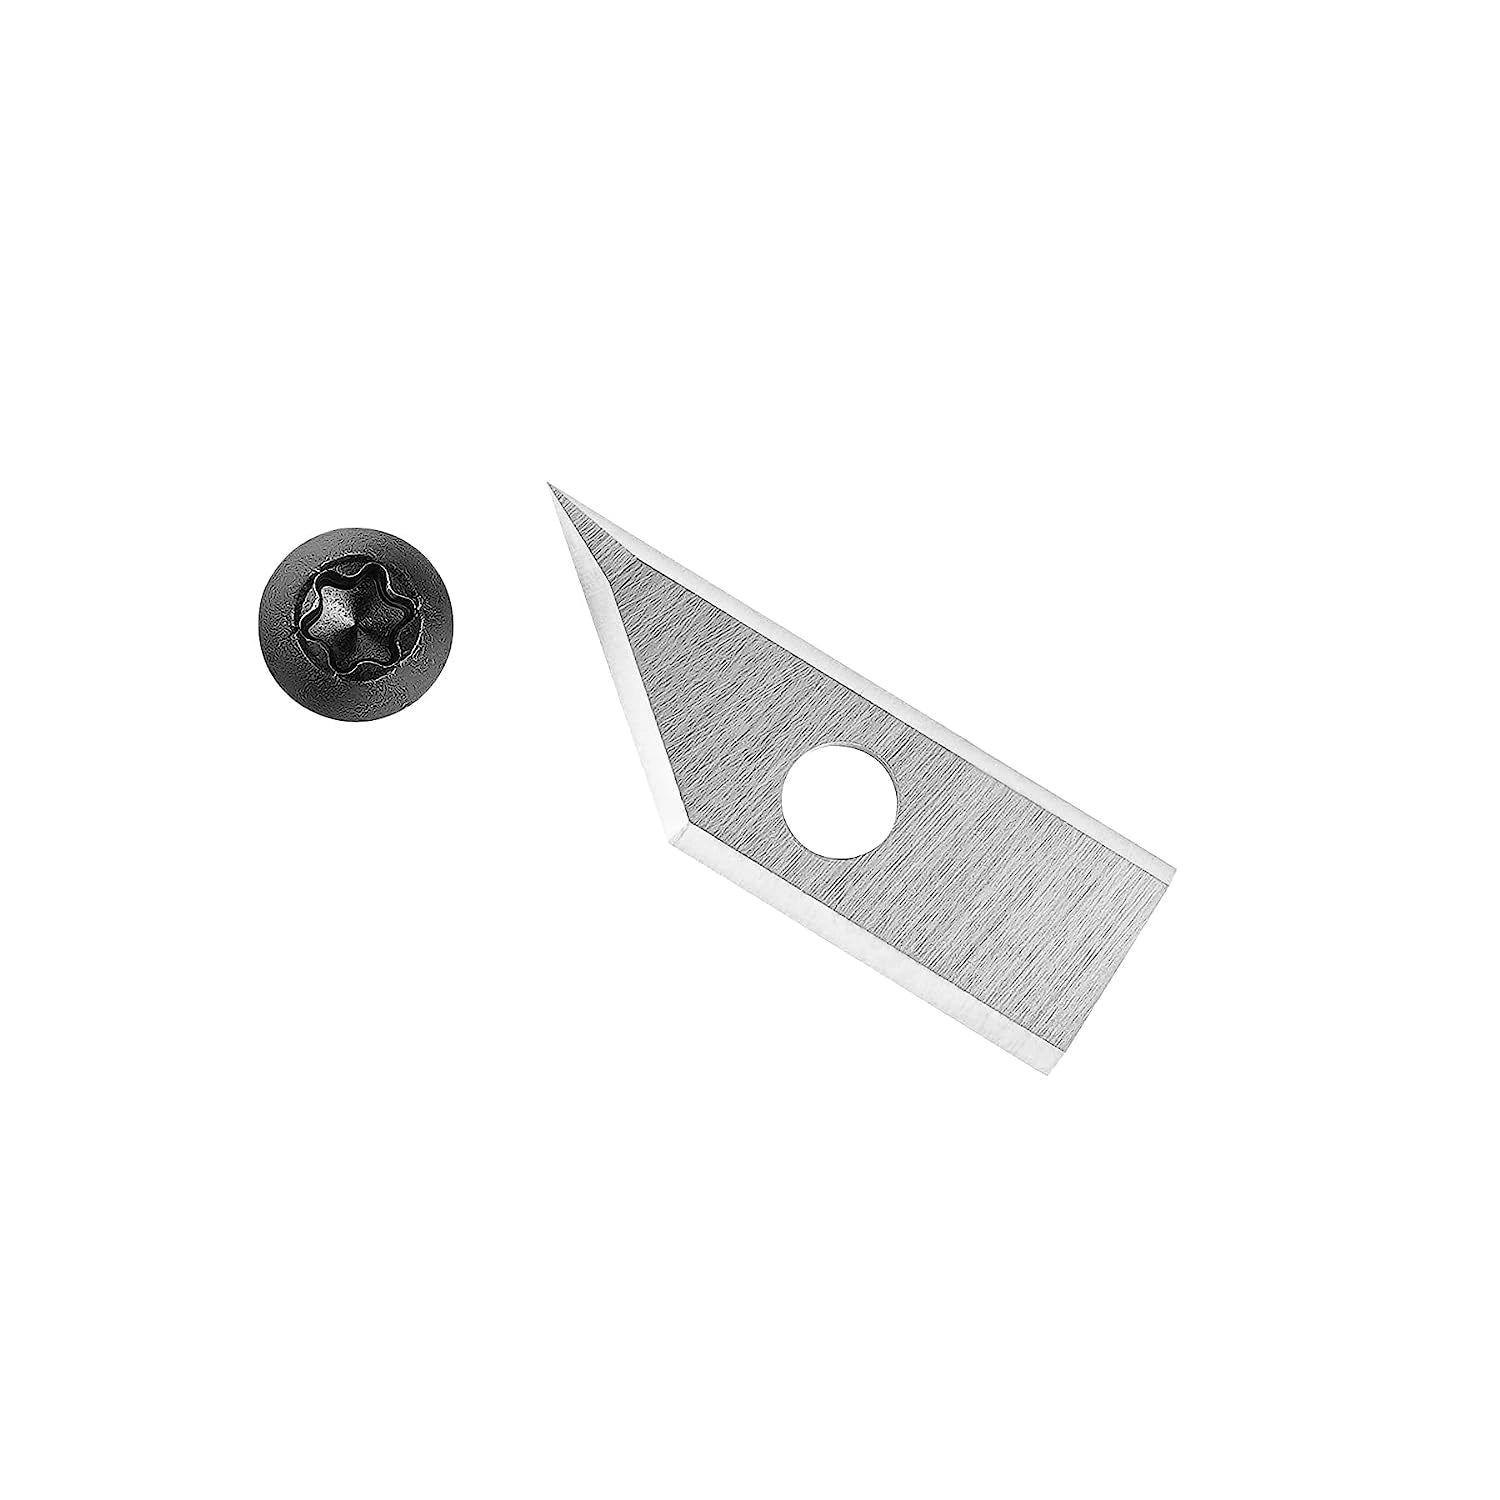 SpeTool Replacement Carbide Insert Blades For Insert V Groove Bits